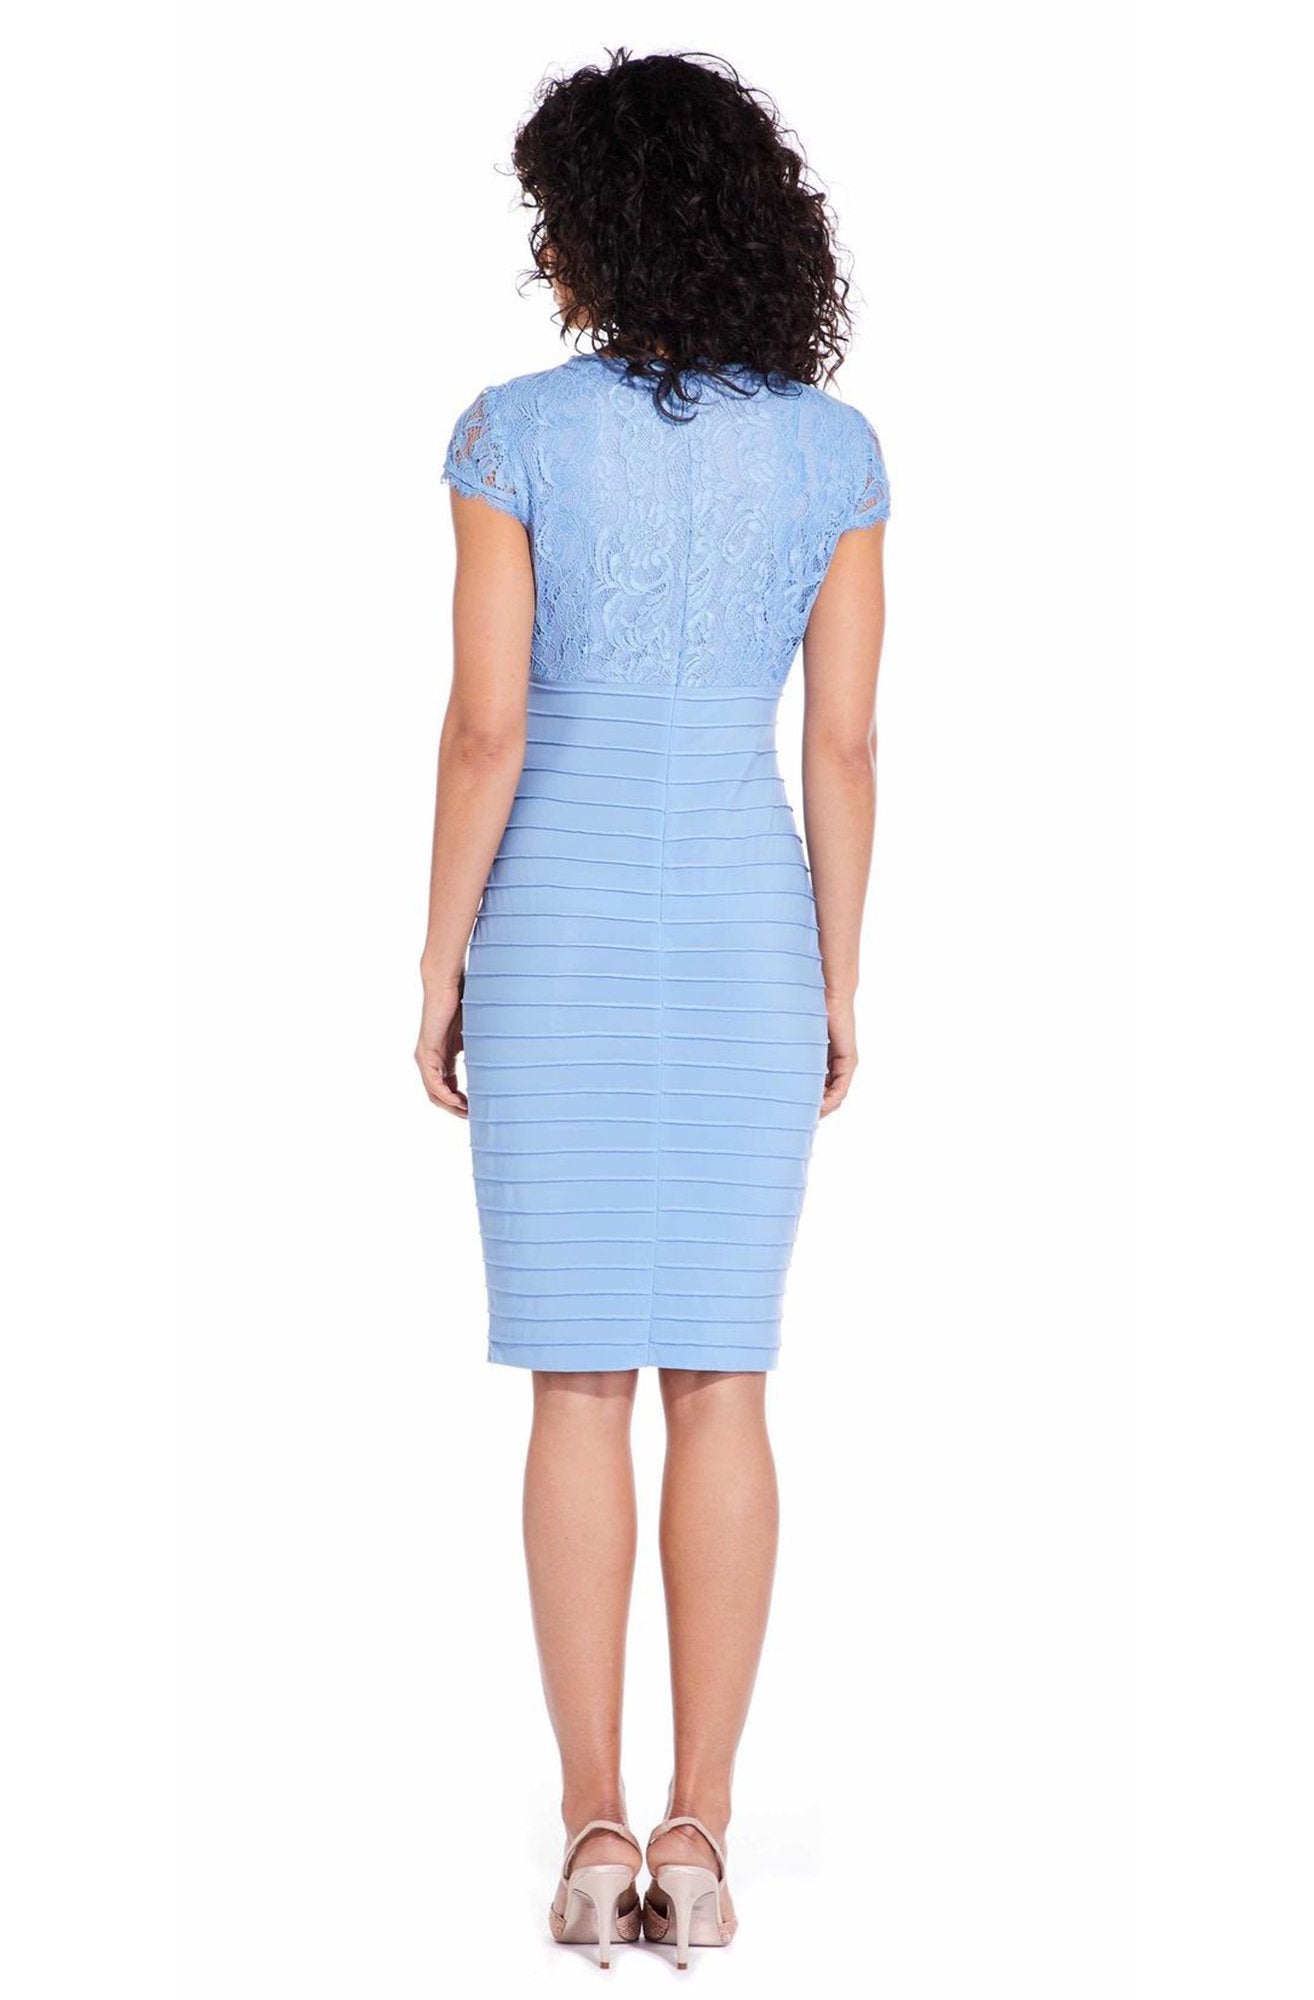 Adrianna Papell - AP1D103085 Lace Applique V-neck Piping Sheath Dress In Blue